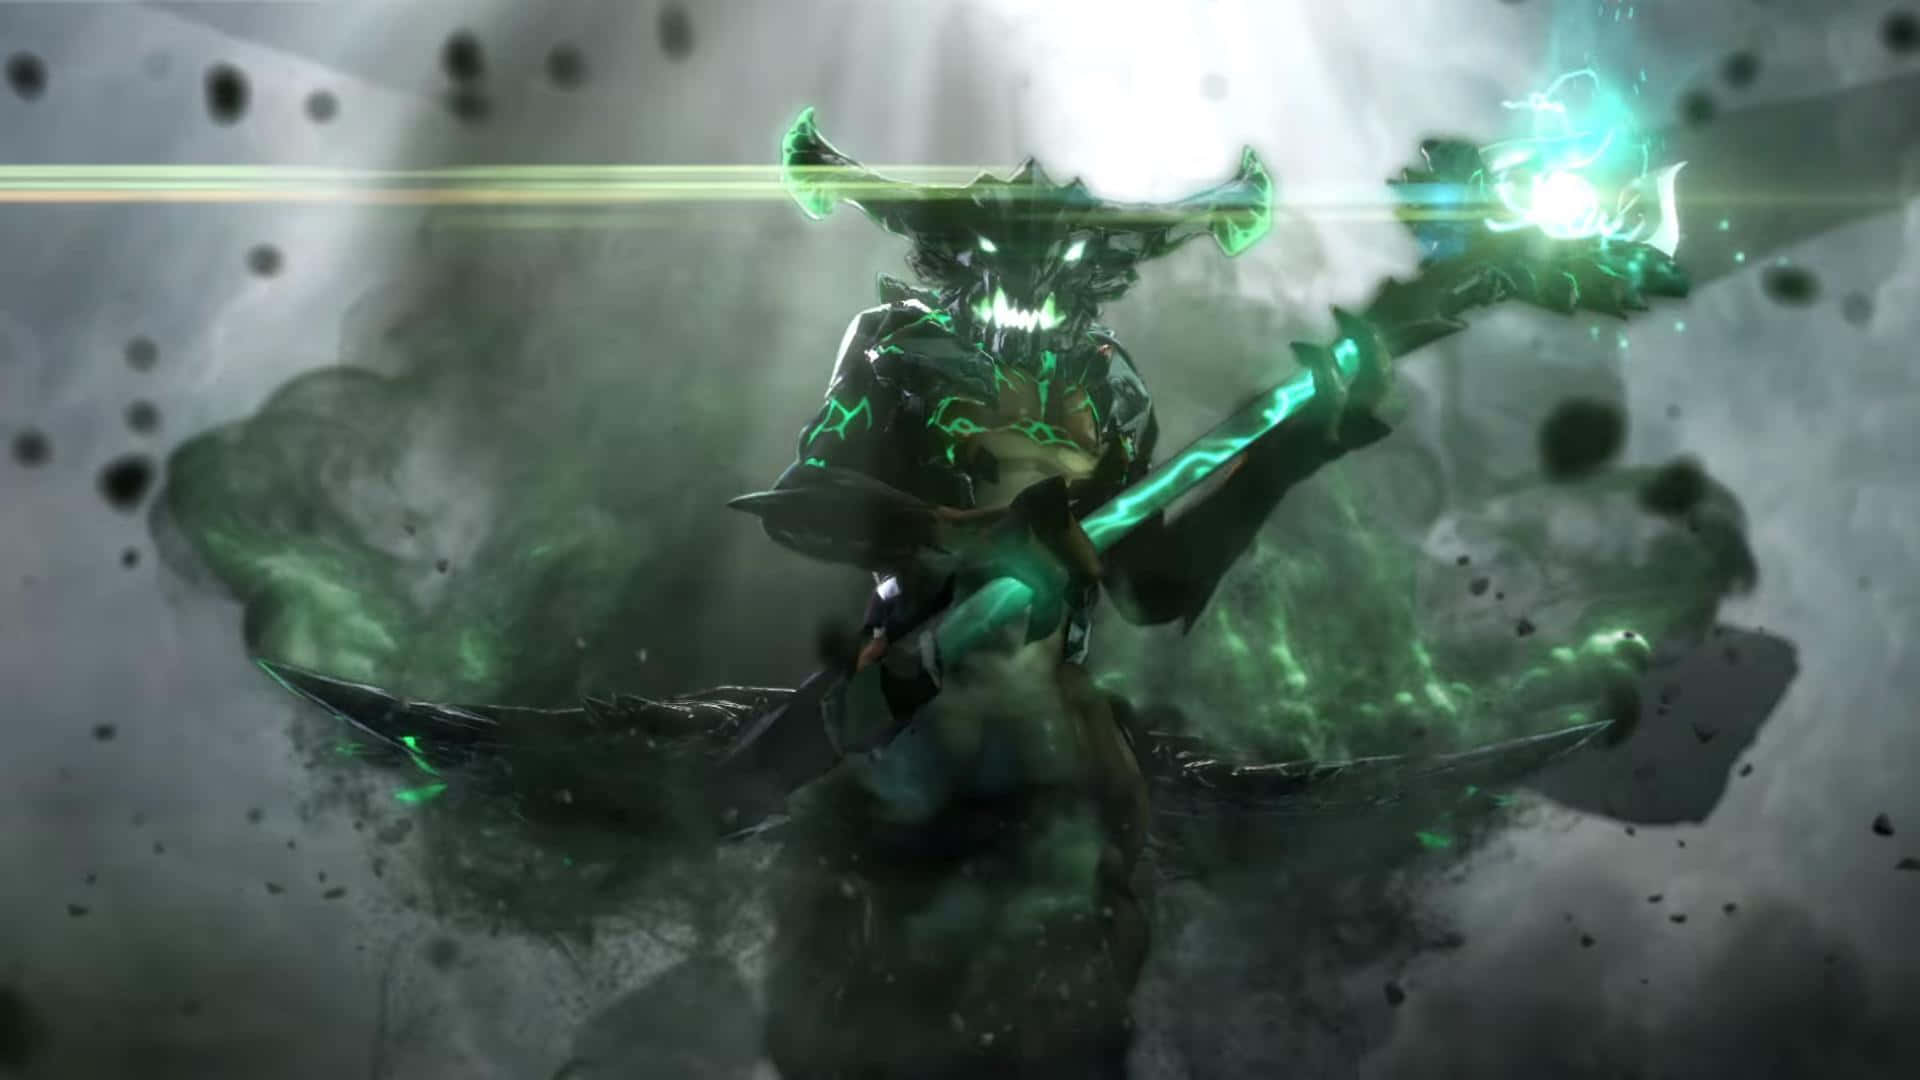 Captivating Rubick in Action Wallpaper